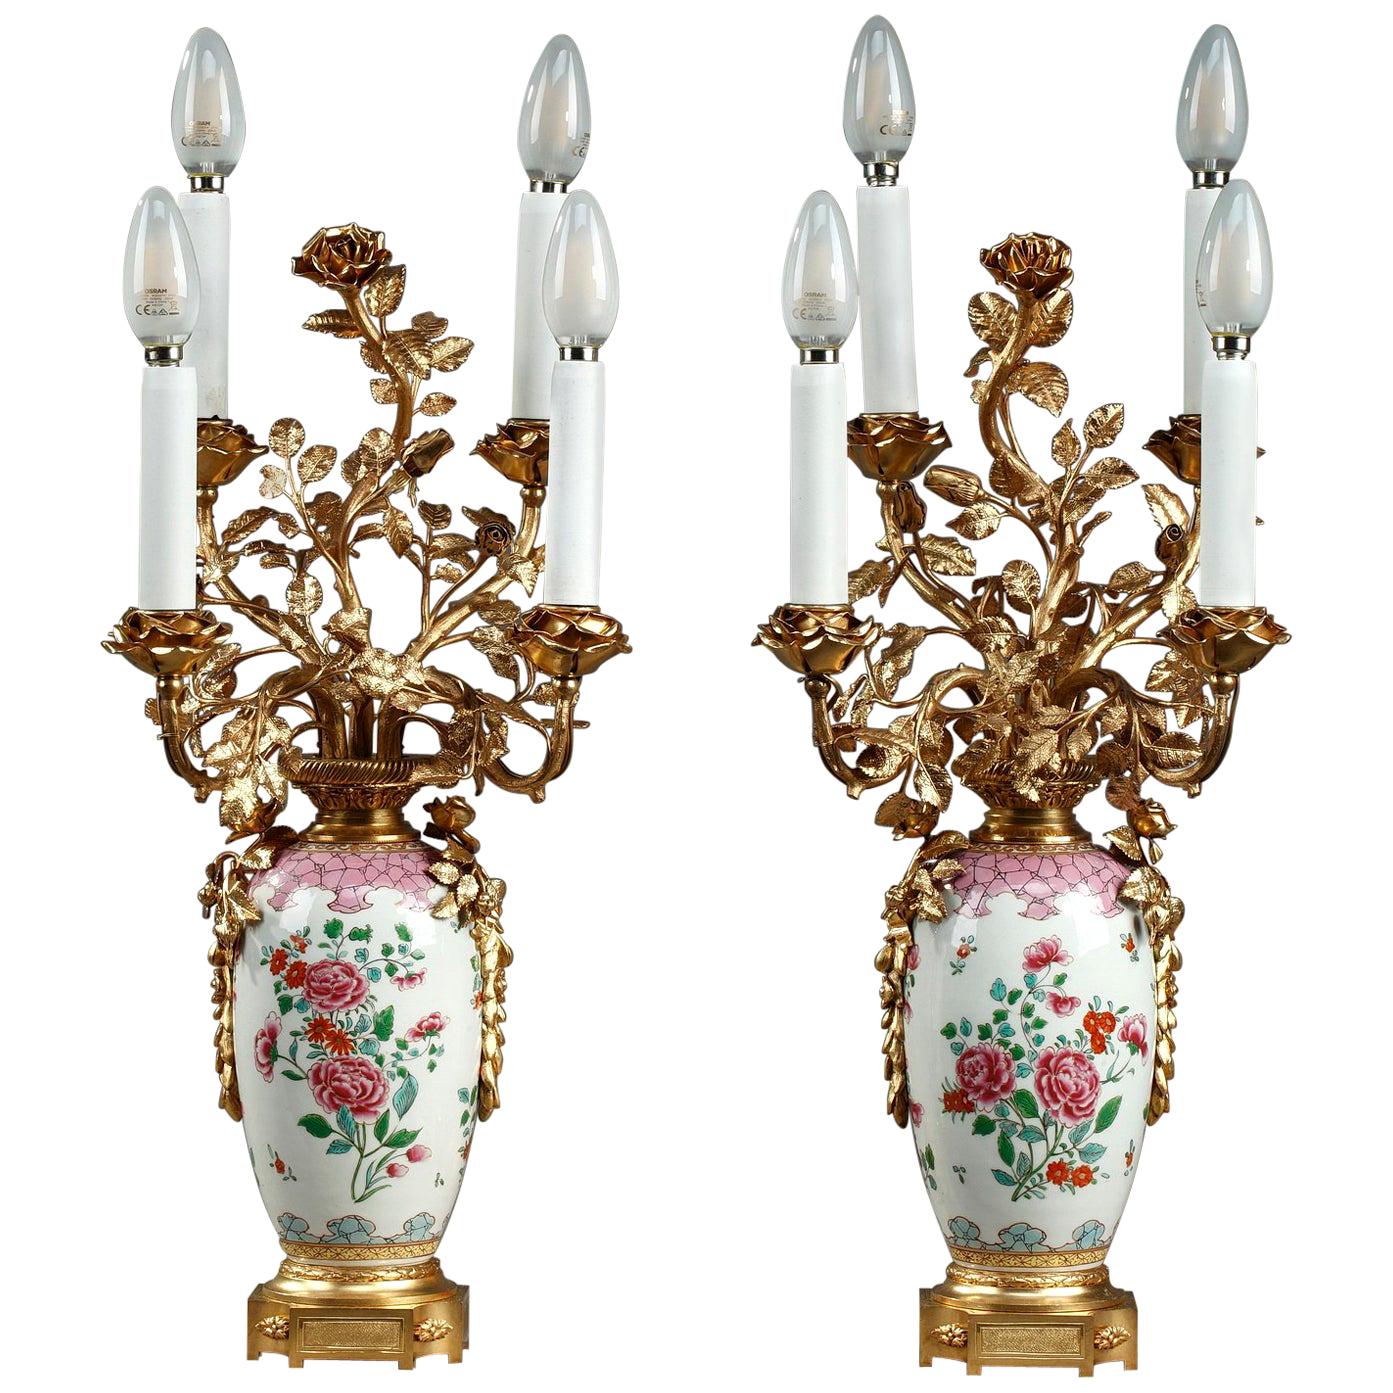 Late 19th Century Antique Lamps in Famille Rose Chinese Porcelain Taste